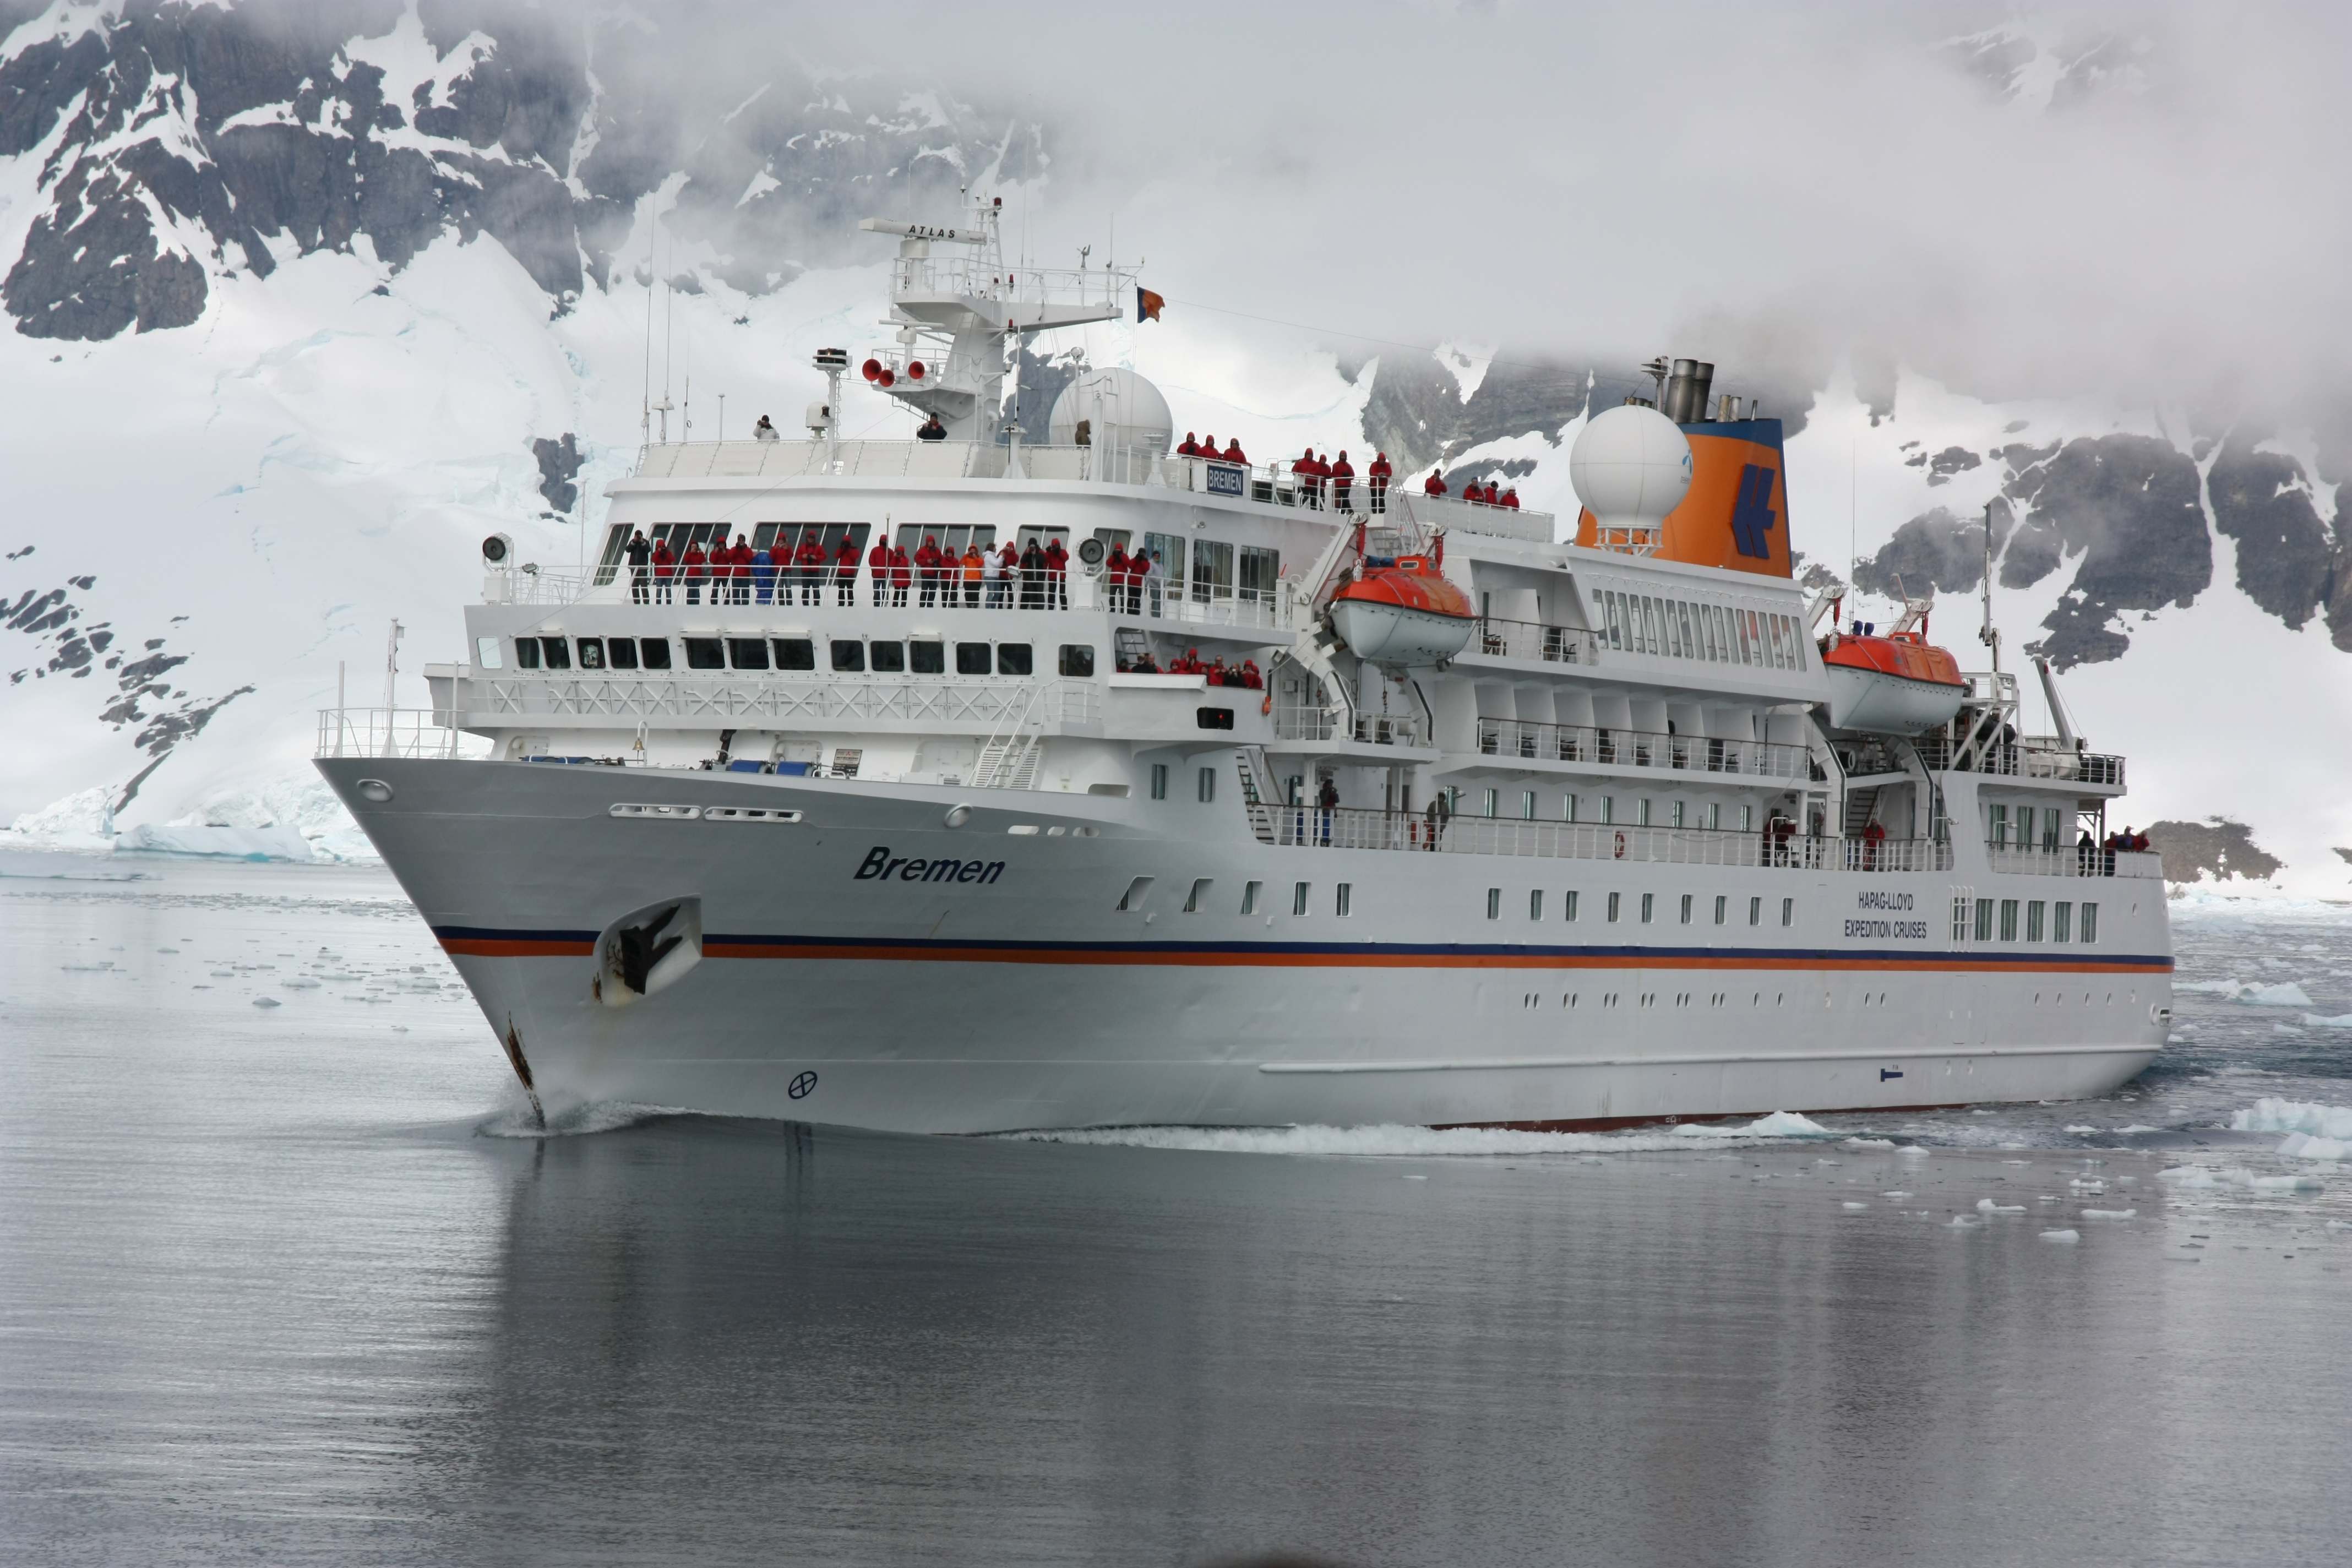 The majority of visitors to the Antarctic come by ship.